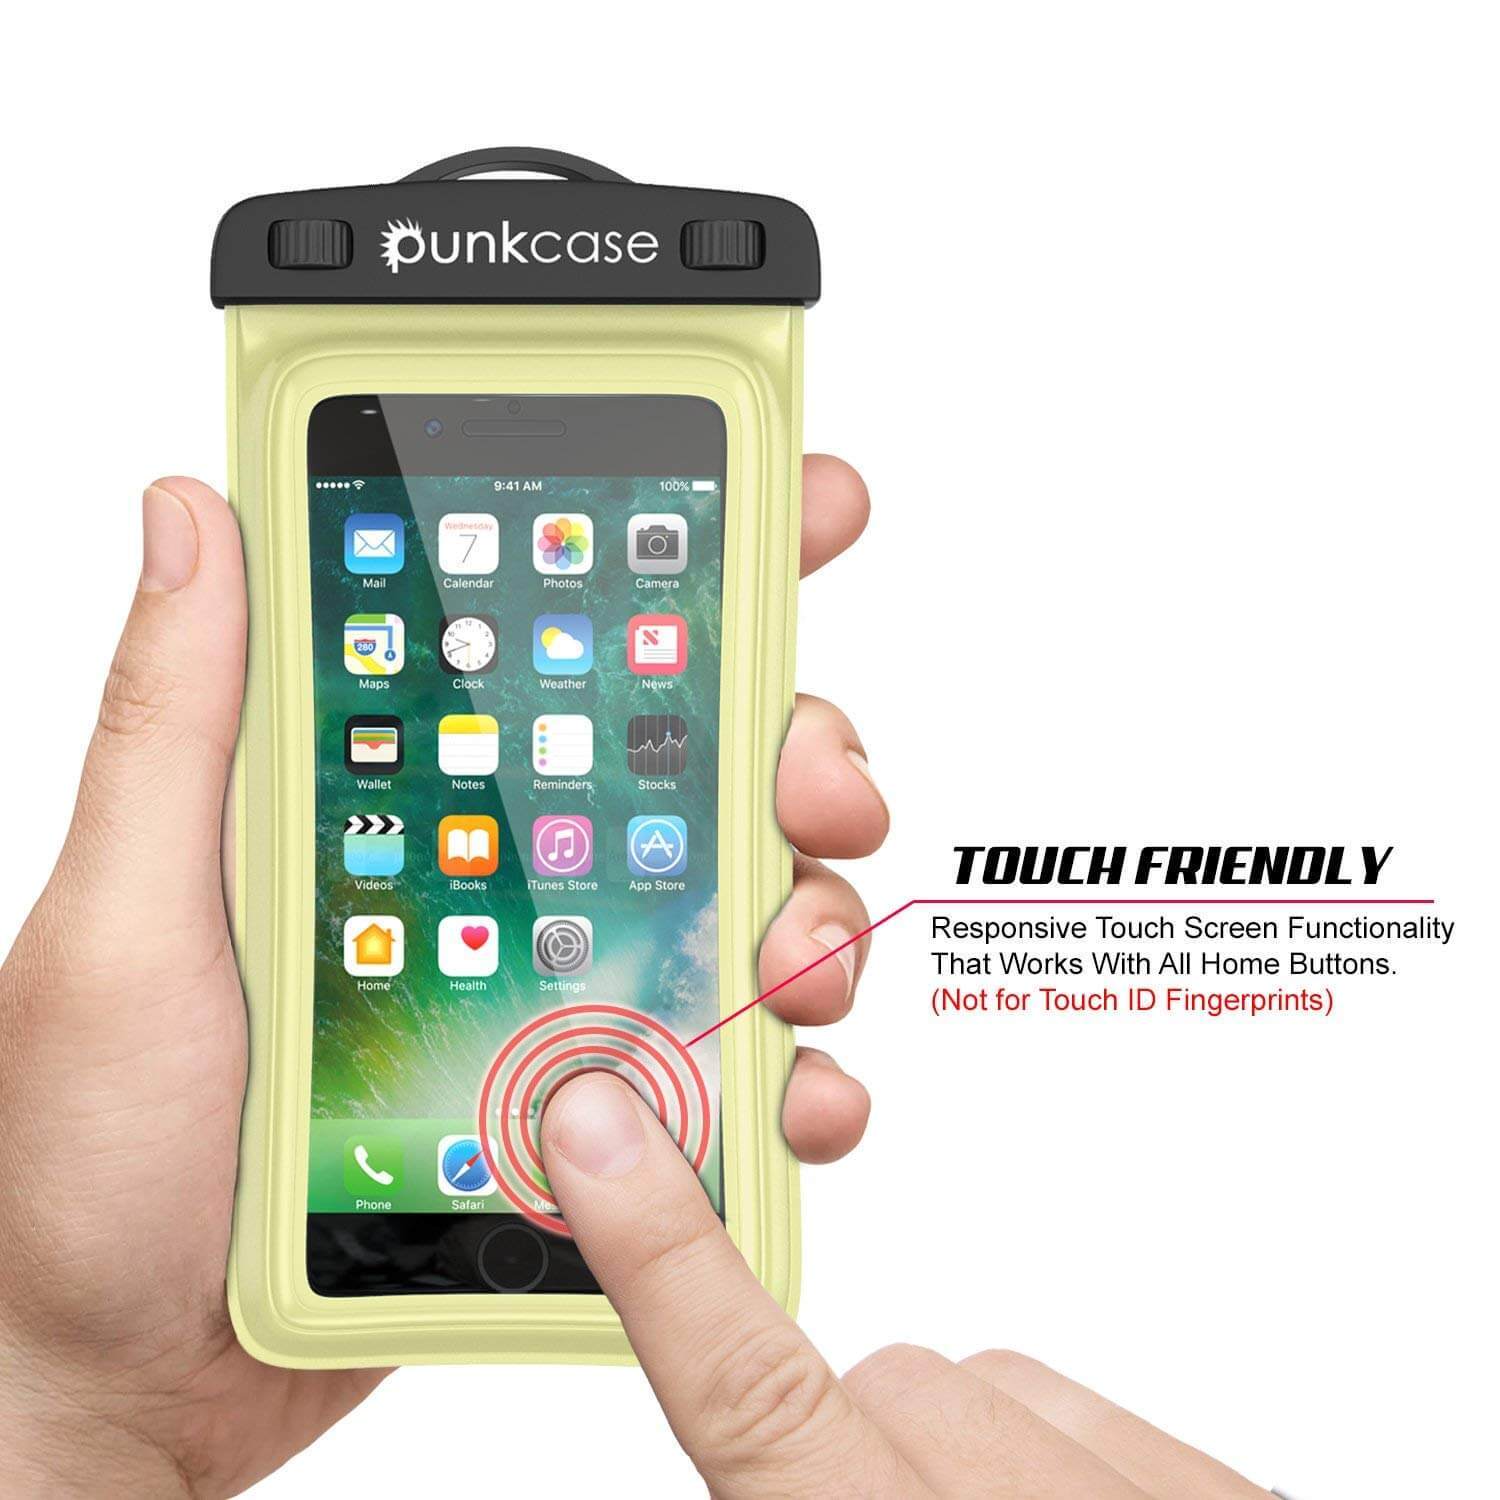 Waterproof Phone Pouch, PunkBag Universal Floating Dry Case Bag for most Cell Phones [Light Green] - PunkCase NZ